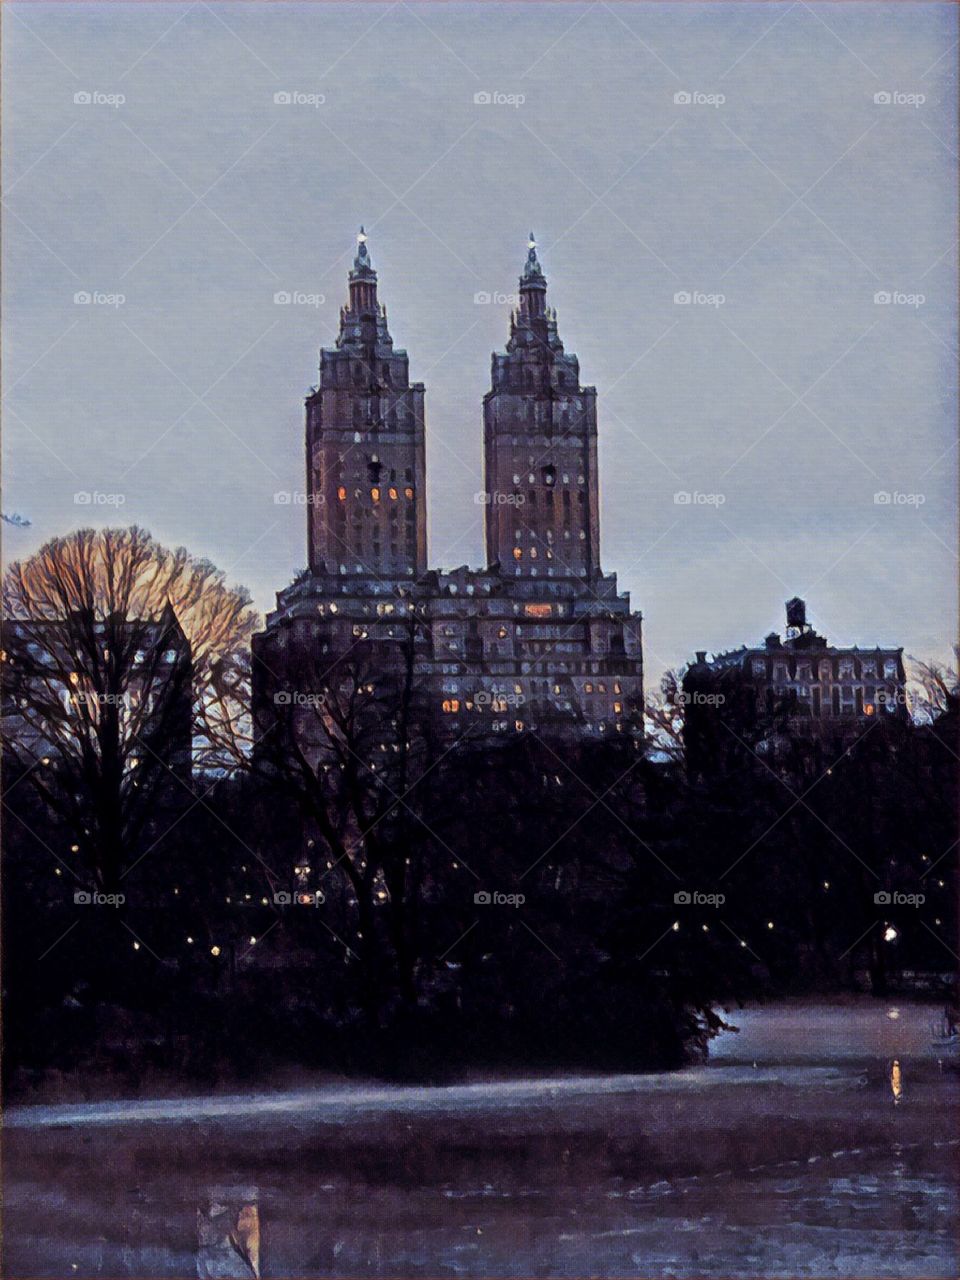 Evening, frozen, The Lake, Central Park with the San Remo Luxury Skyscraper background New York City. 